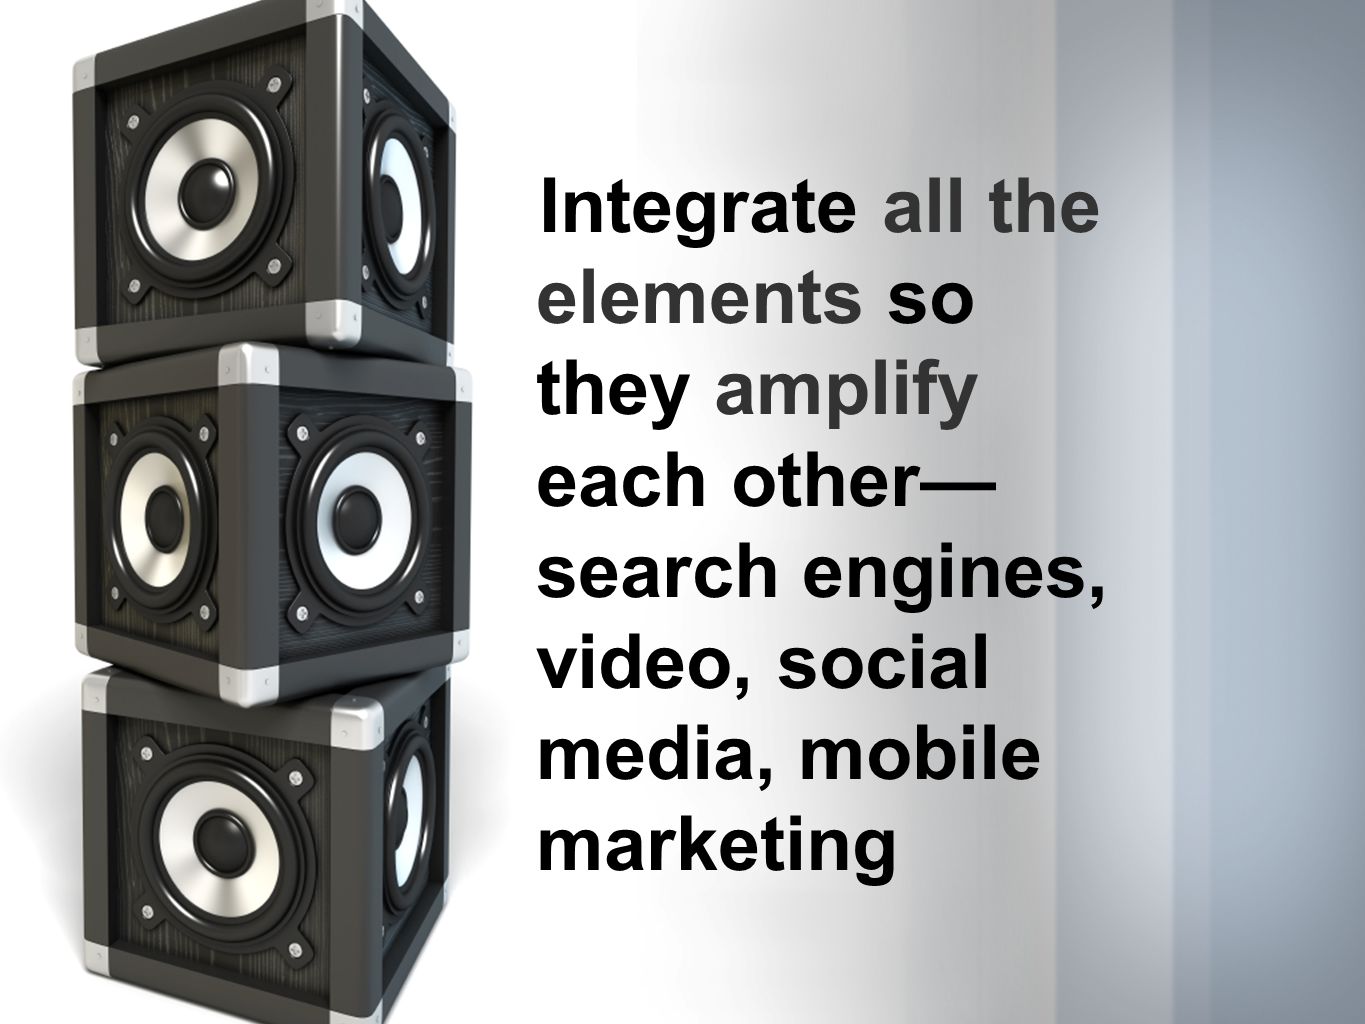 Integrate all the elements so they amplify each other search engines, video, social media, mobile marketing